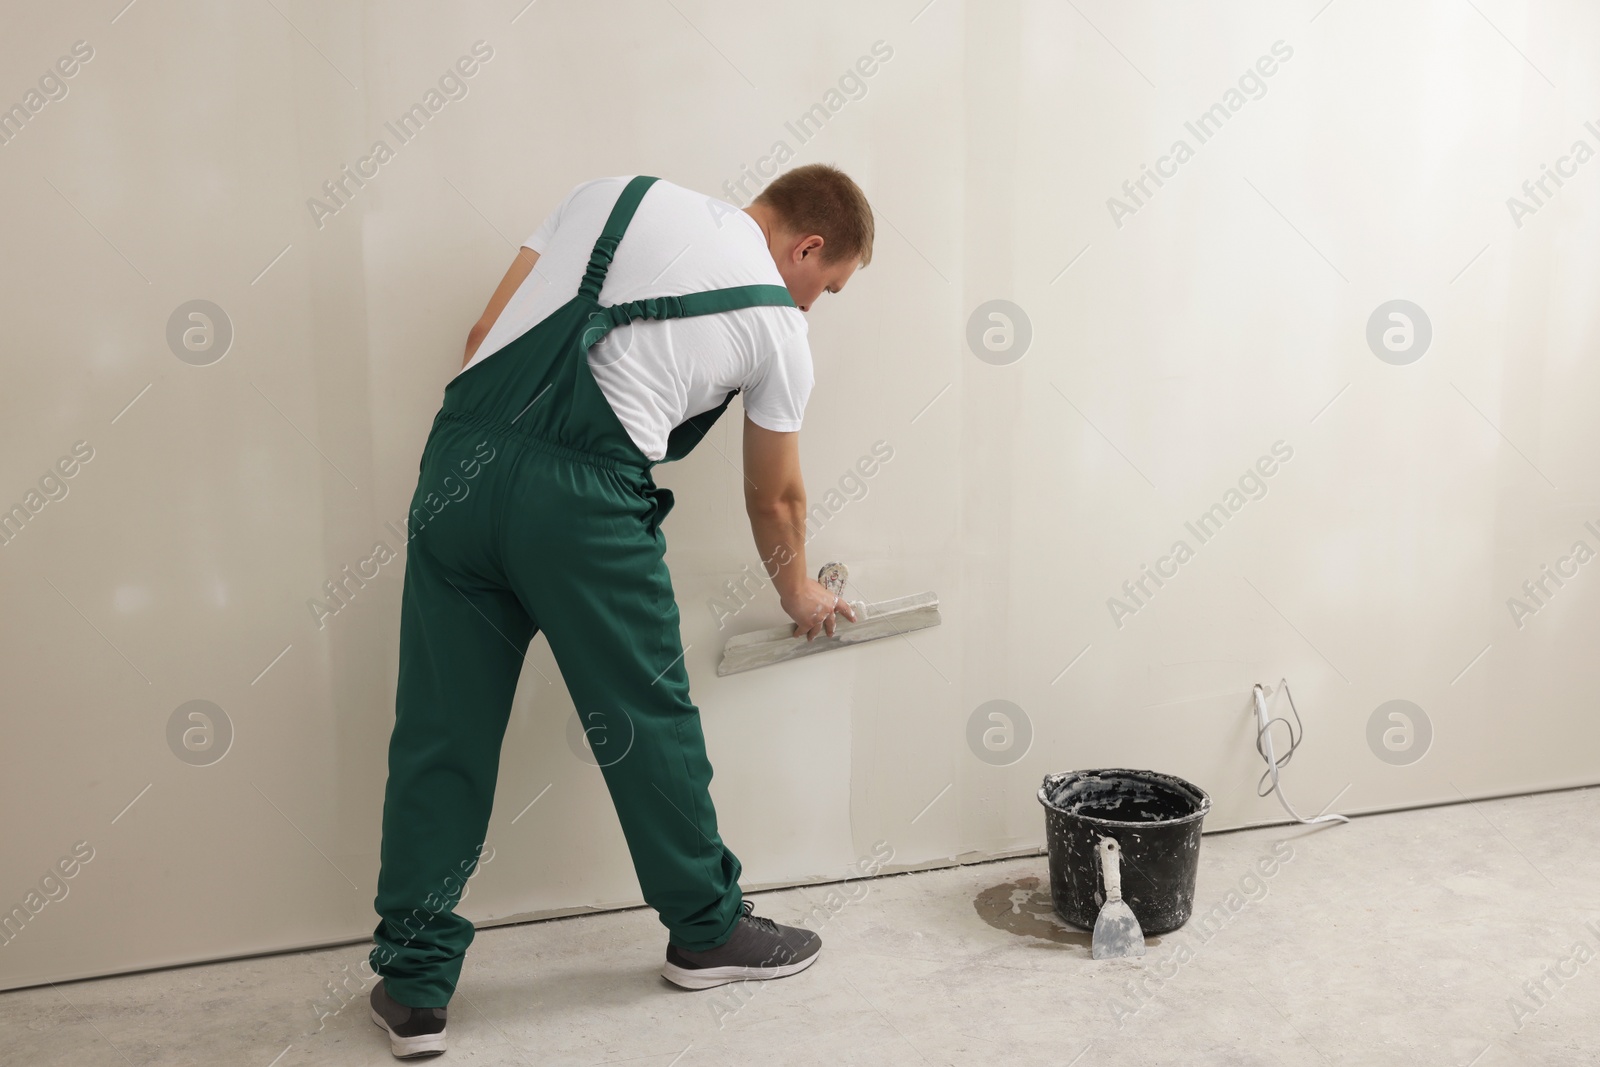 Photo of Professional worker plastering wall with putty knife indoors